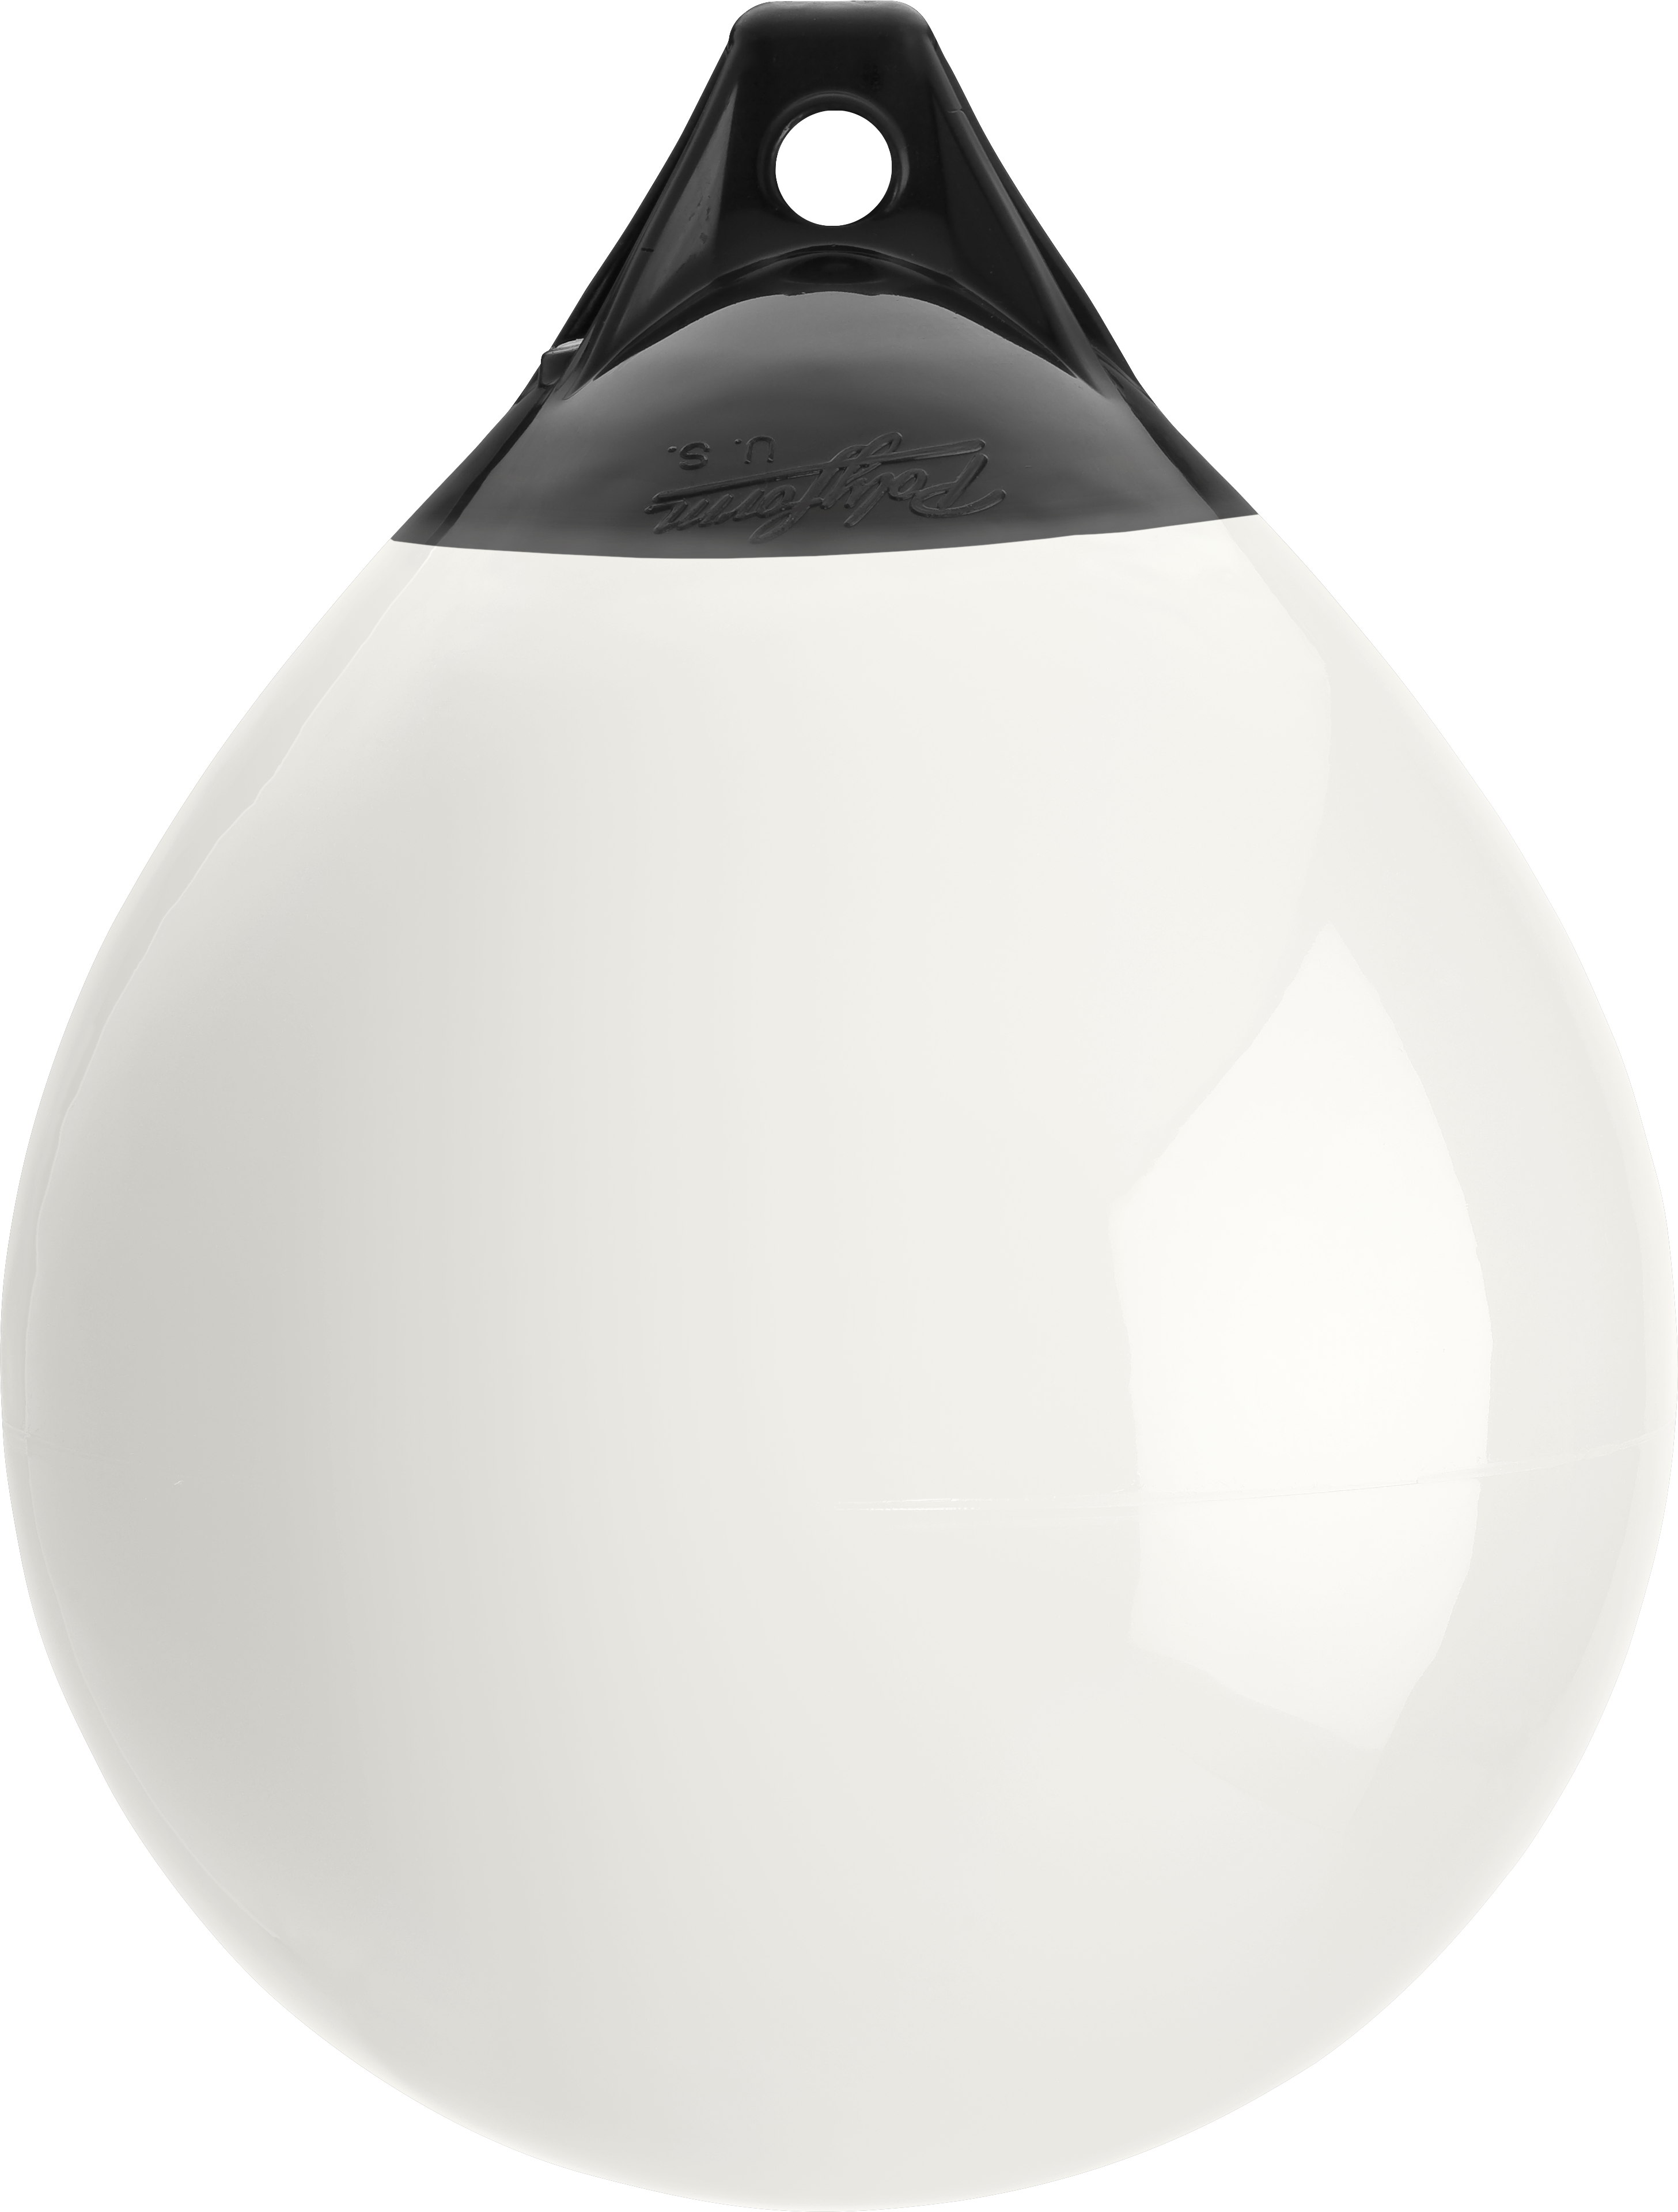 Polyform A Series Buoy with black top